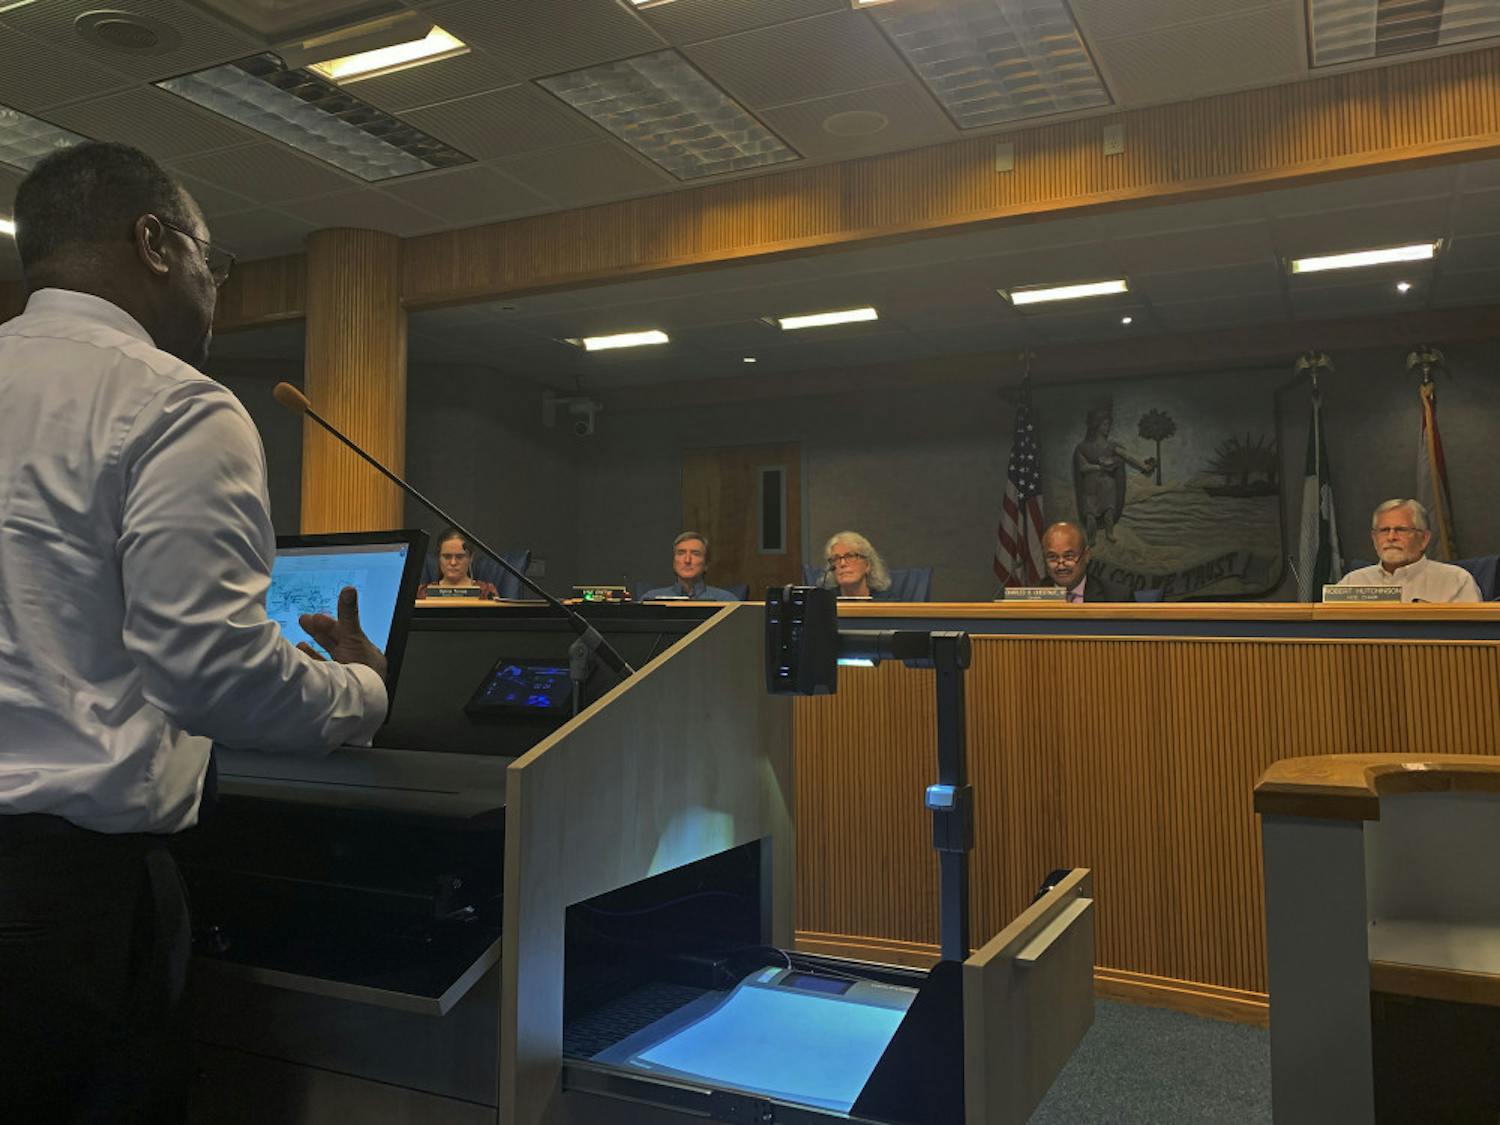 James McKnight, a 62-year-old Gainesville resident, speaks to county commissioners during public comment at a meeting on Tuesday evening. McKnight and his neighbors spoke about the lack of road maintenance at NE 27th Avenue in Northeast Gainesville. 